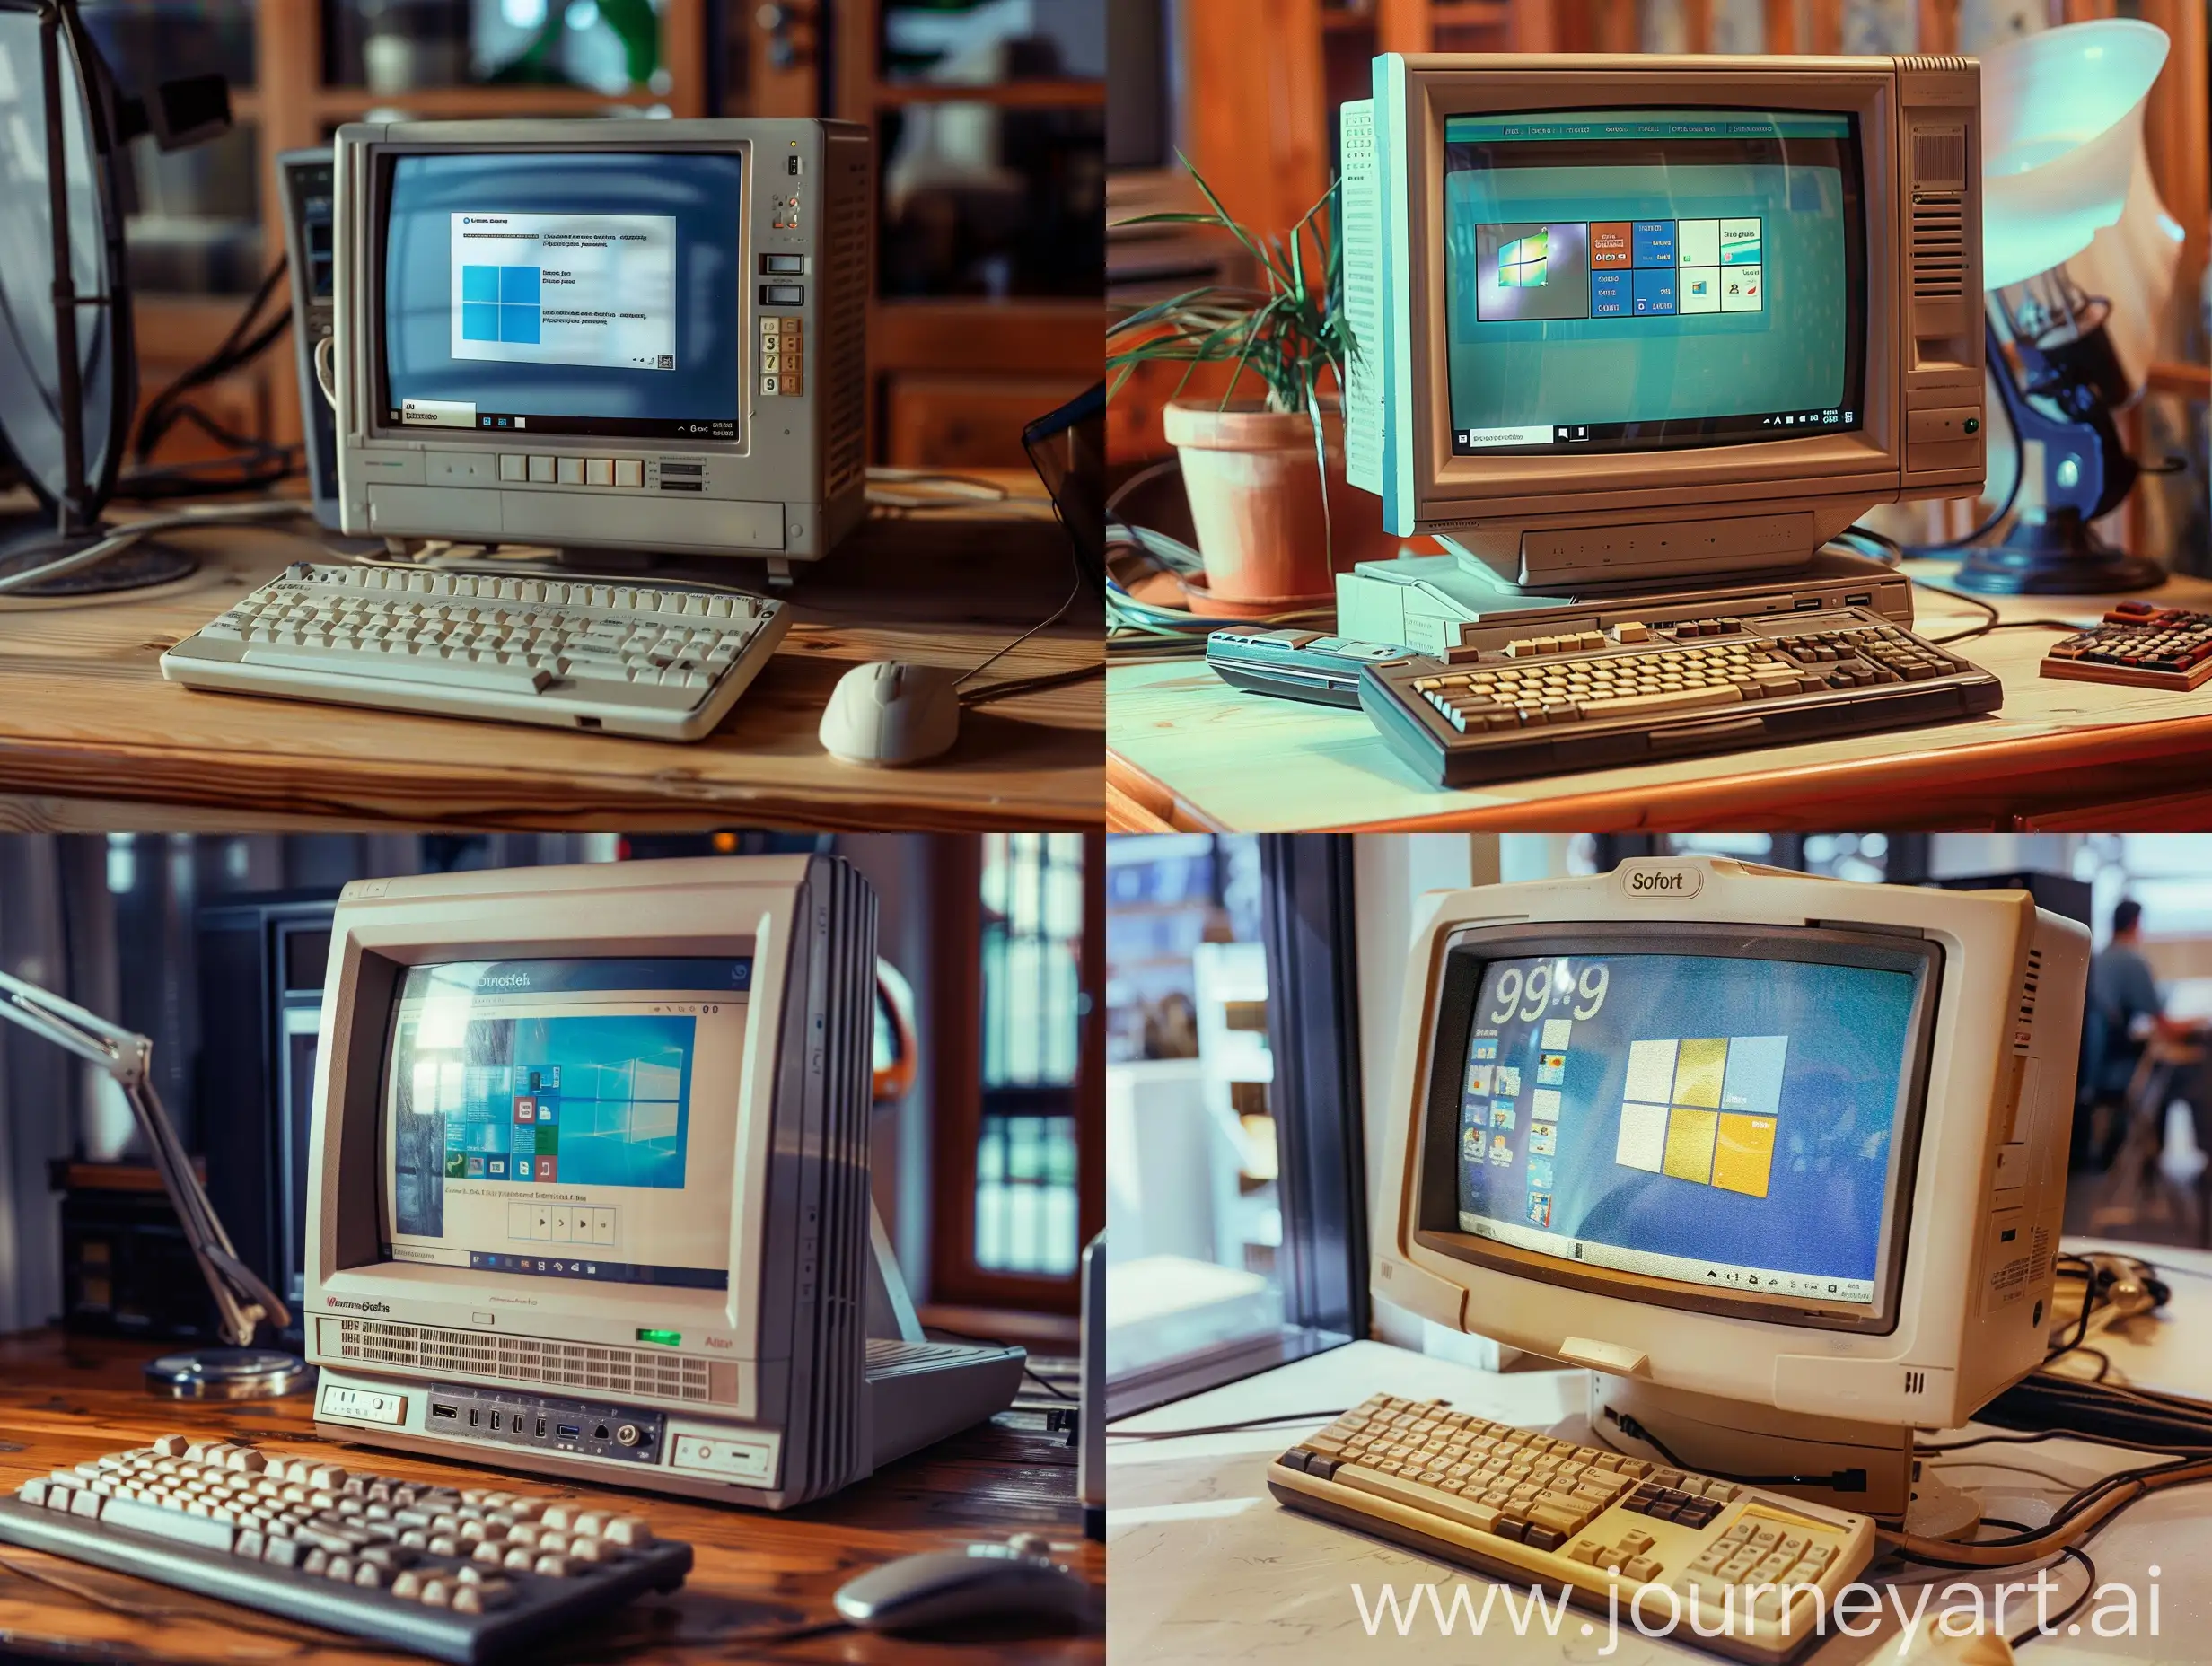 An old computer with Windows 98 displayed on screen in old film grain photo